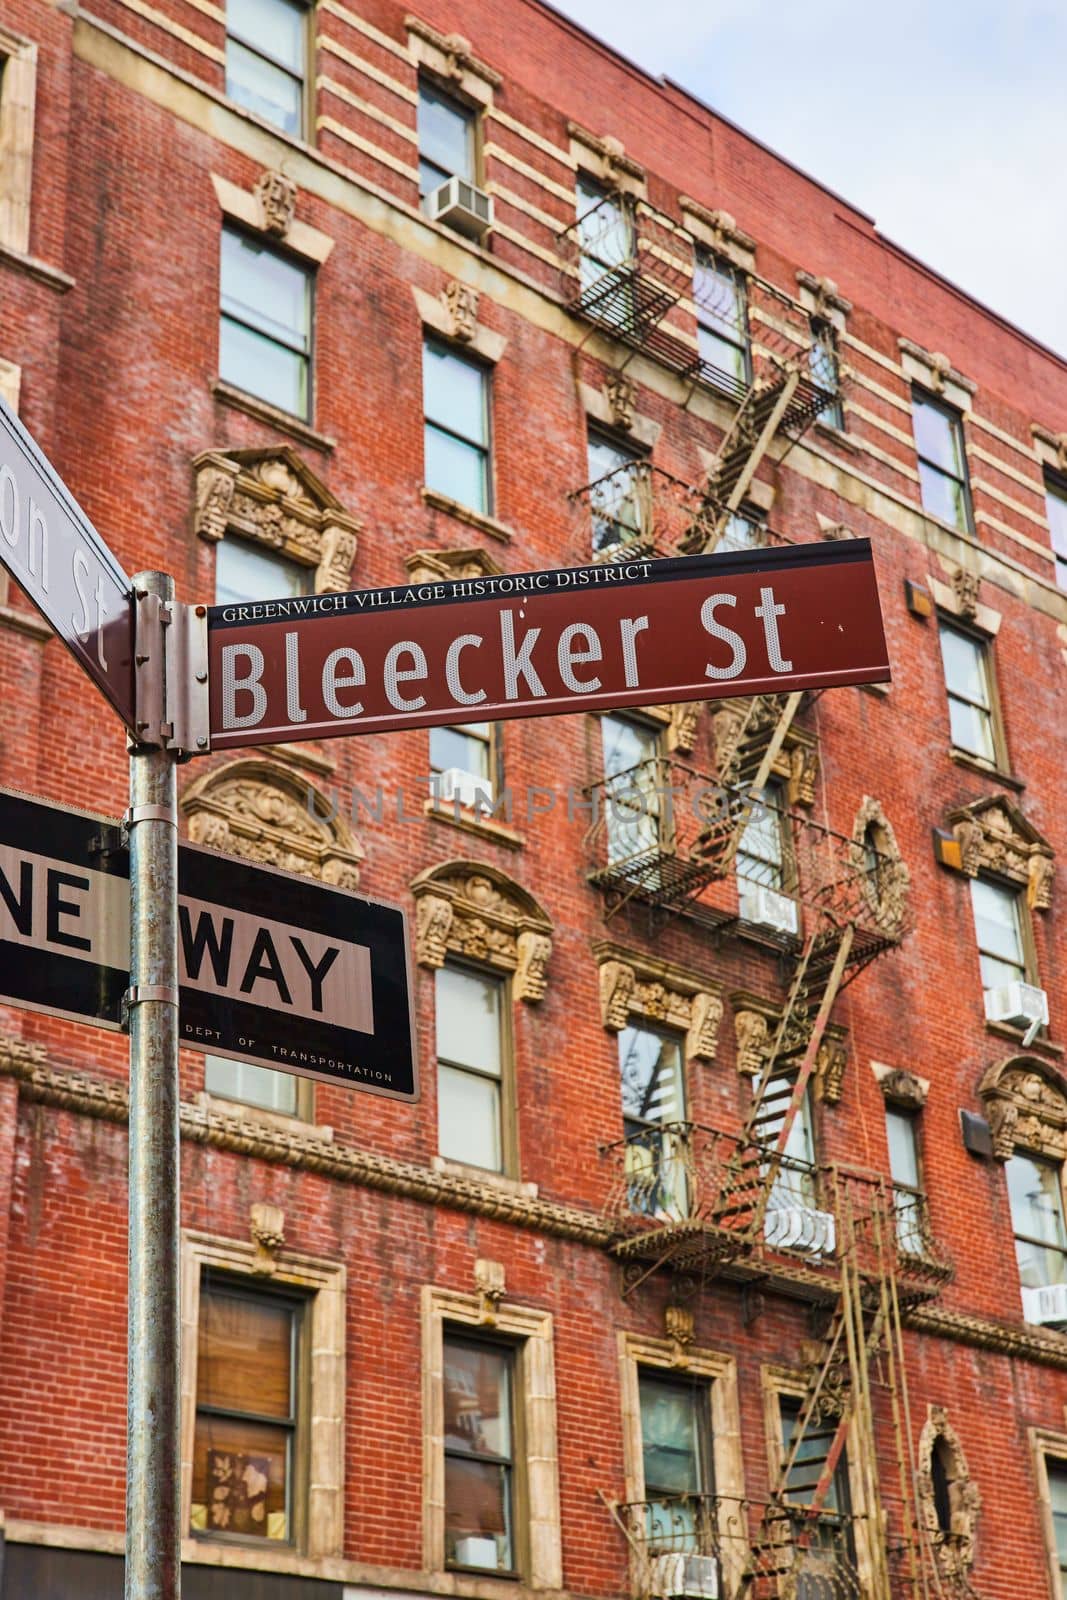 Bleecker Street sign in Greenwich Village New York City with brick building behind by njproductions